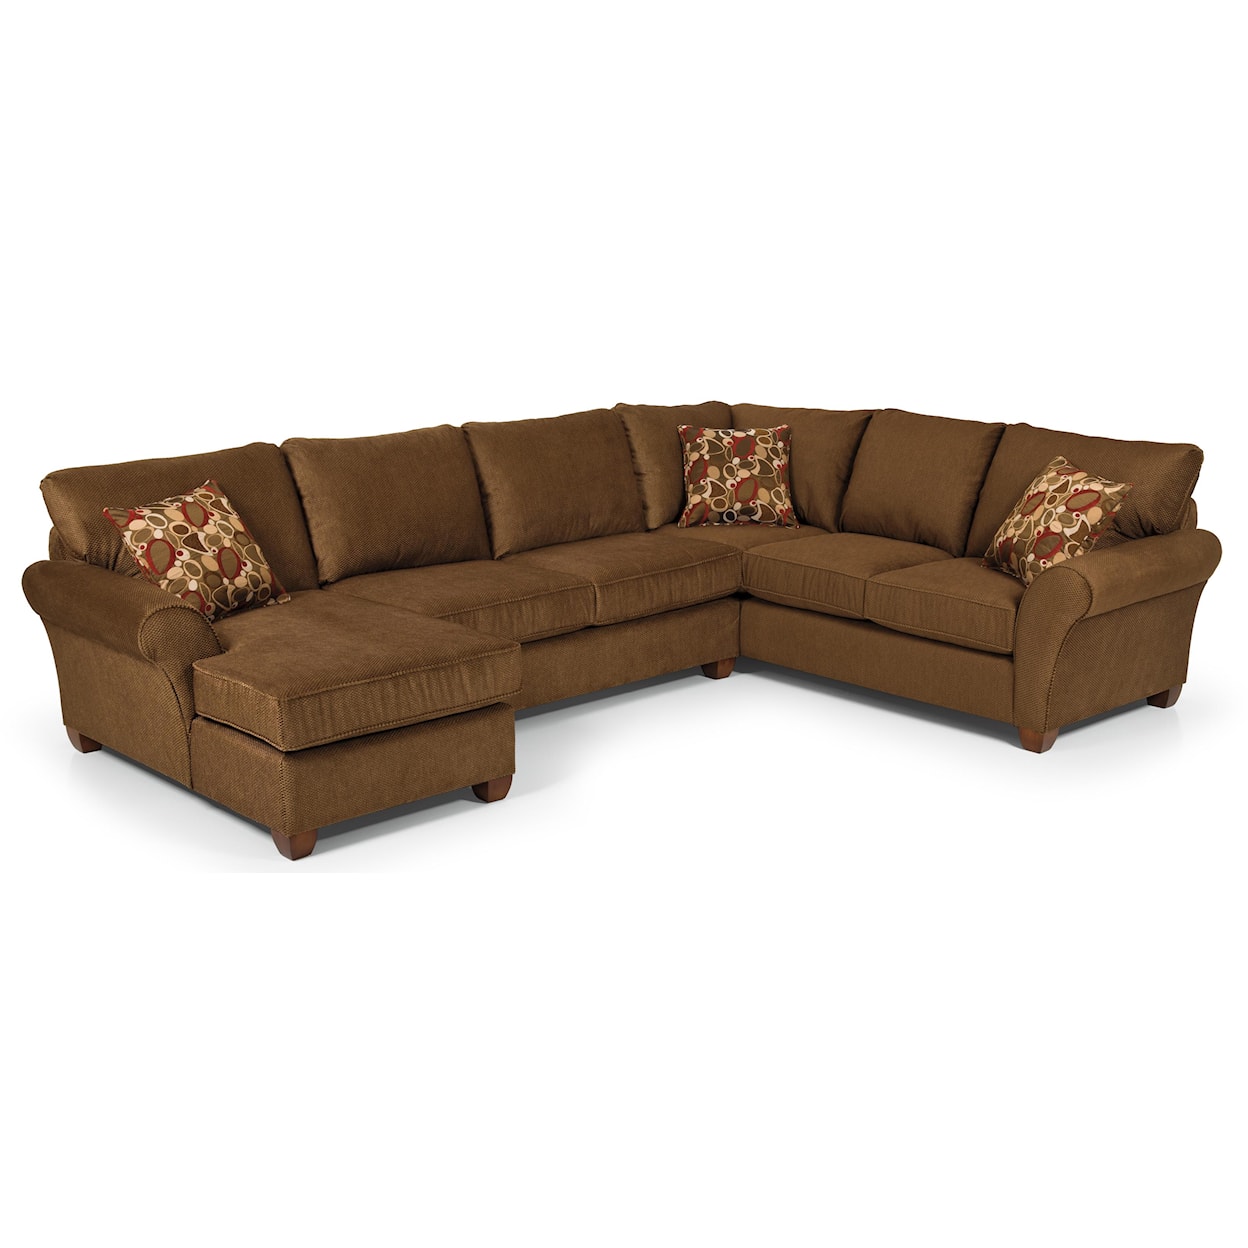 Stanton 320 Transitional Sectional Sofa